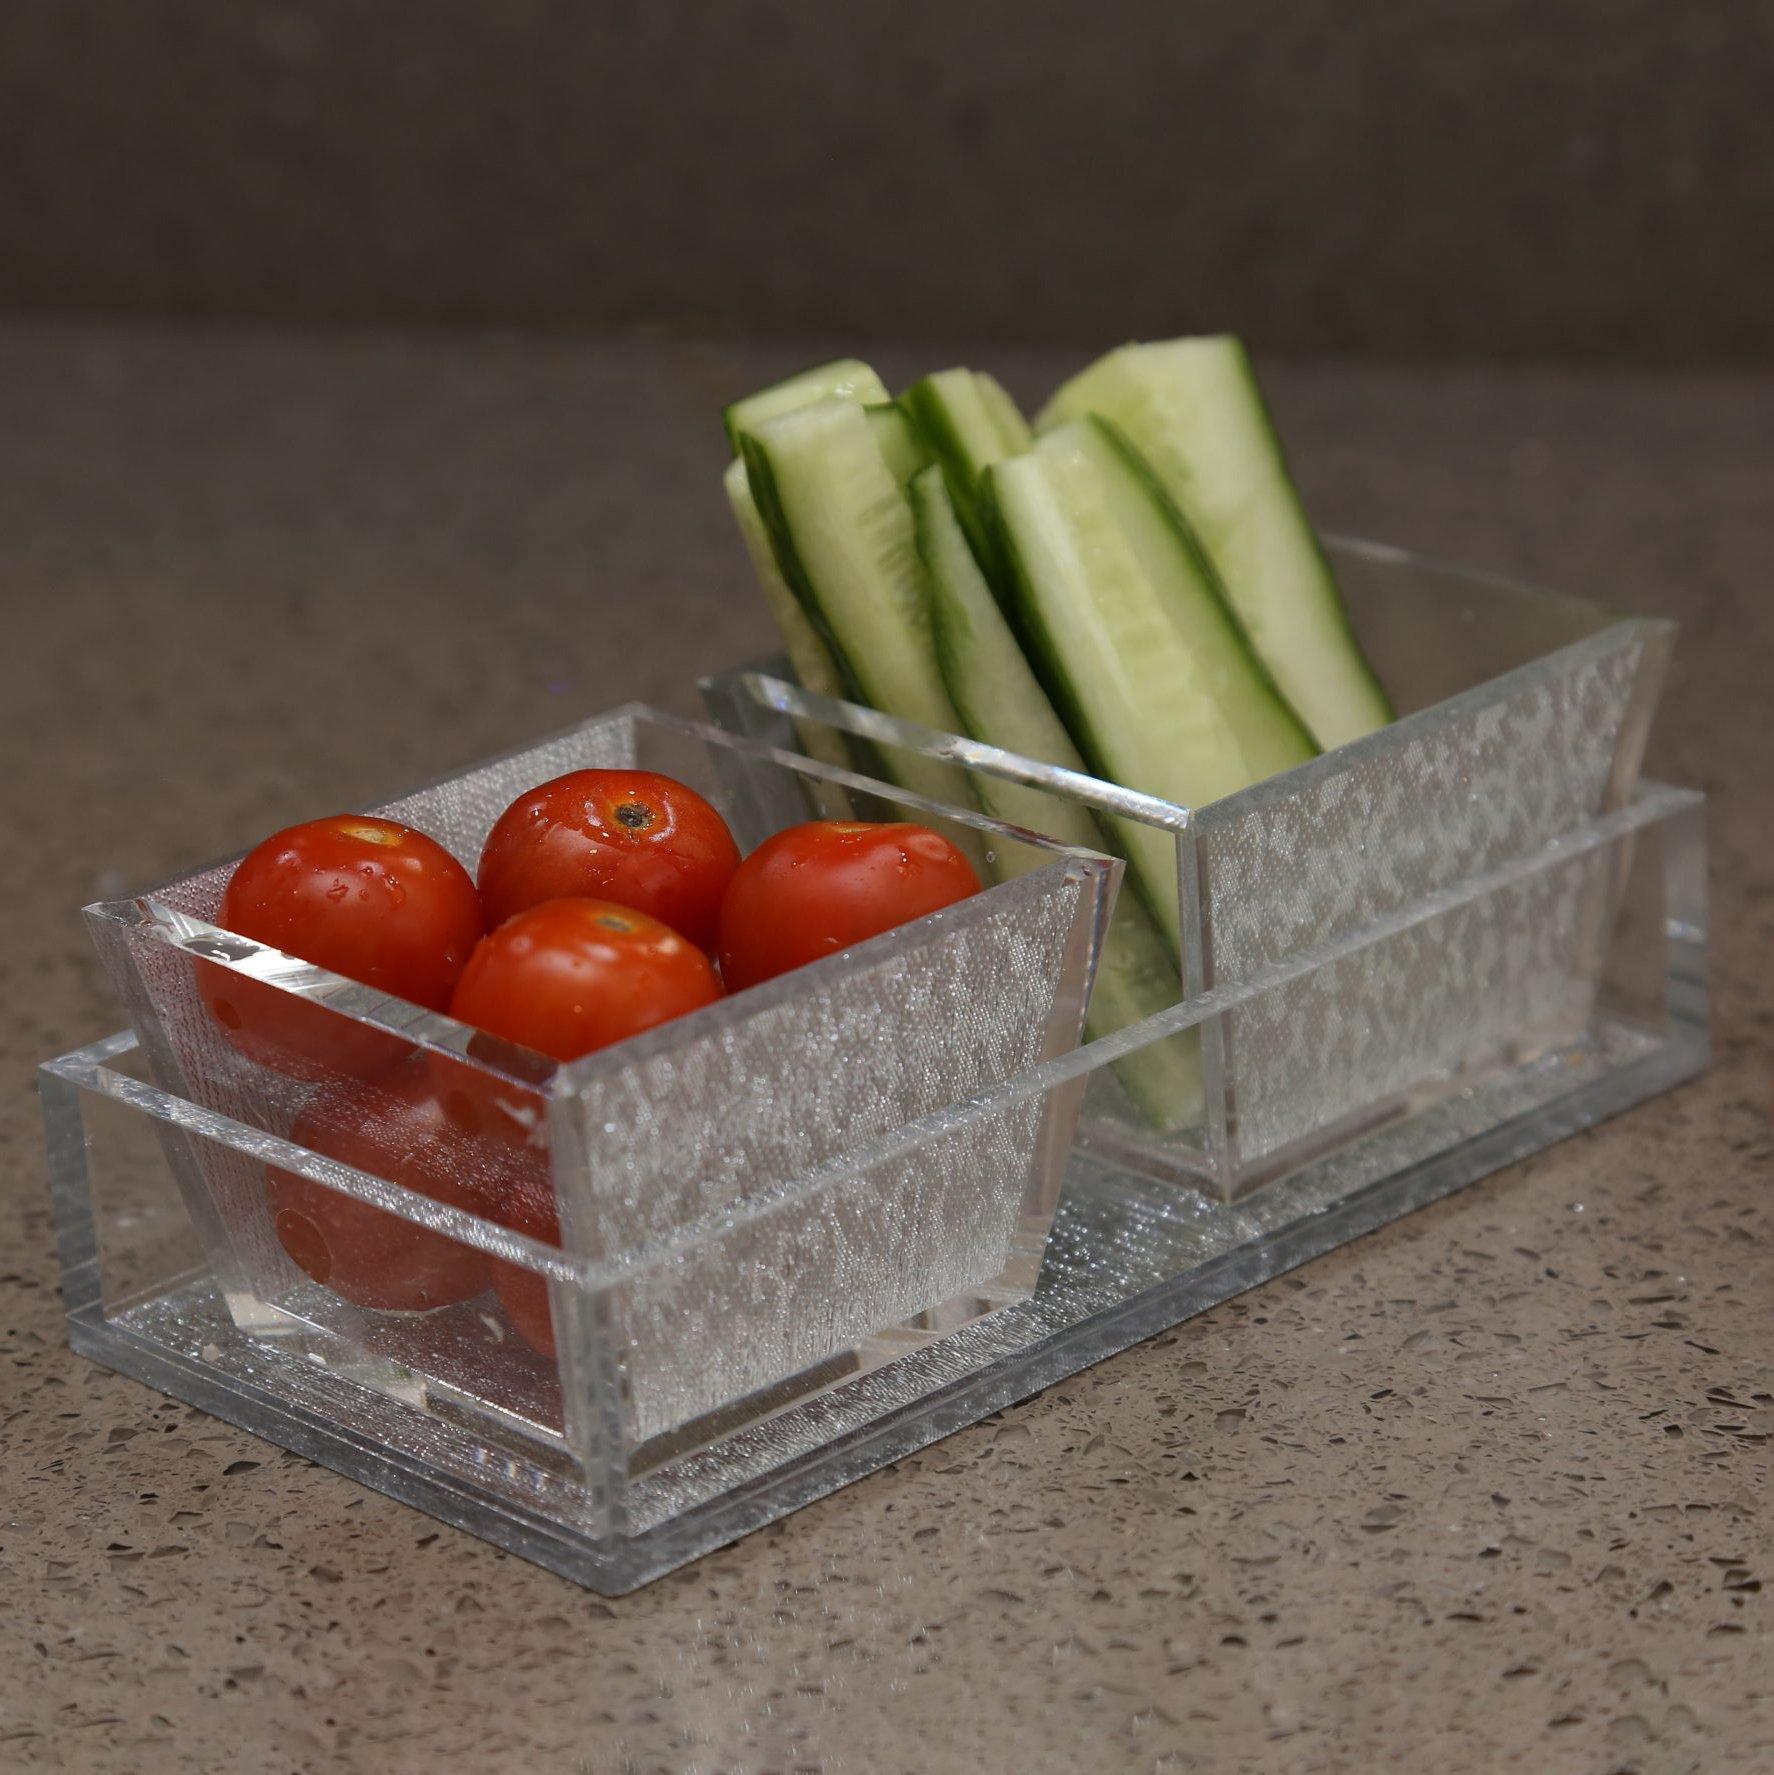 Acrylic set of 2 dip bowls with lid on tray filled